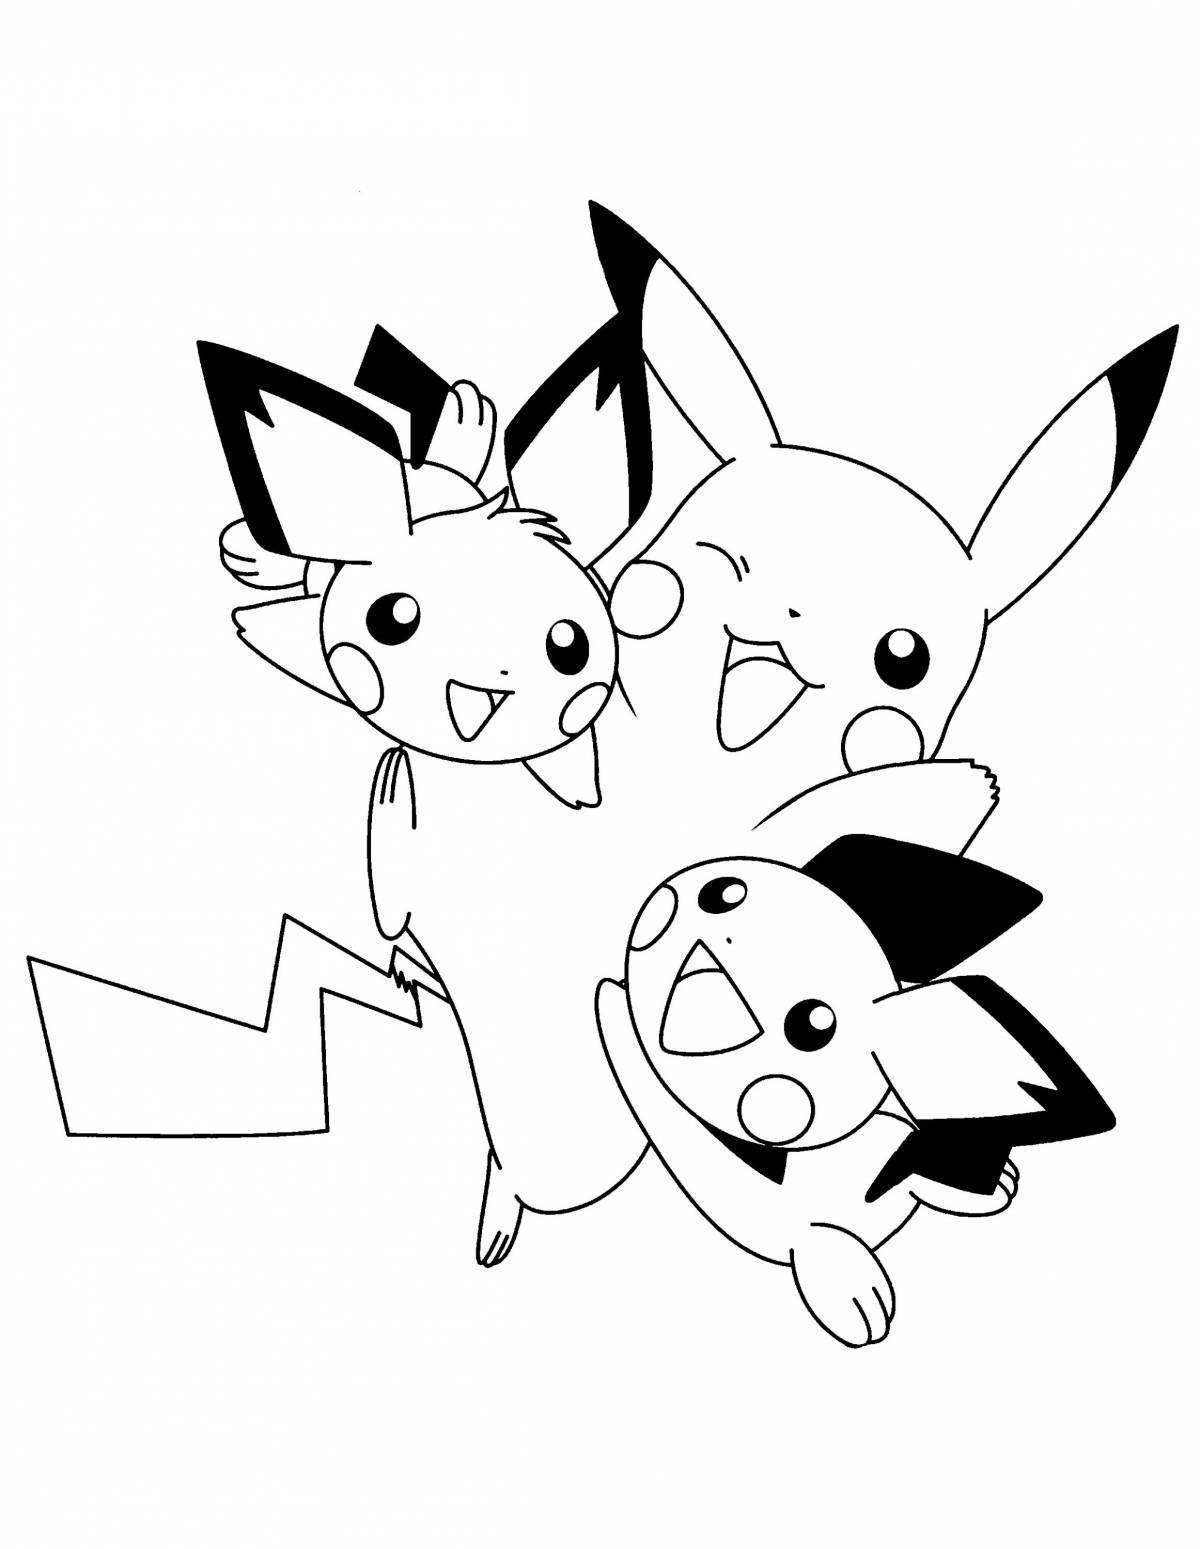 Animated pikachu and friends